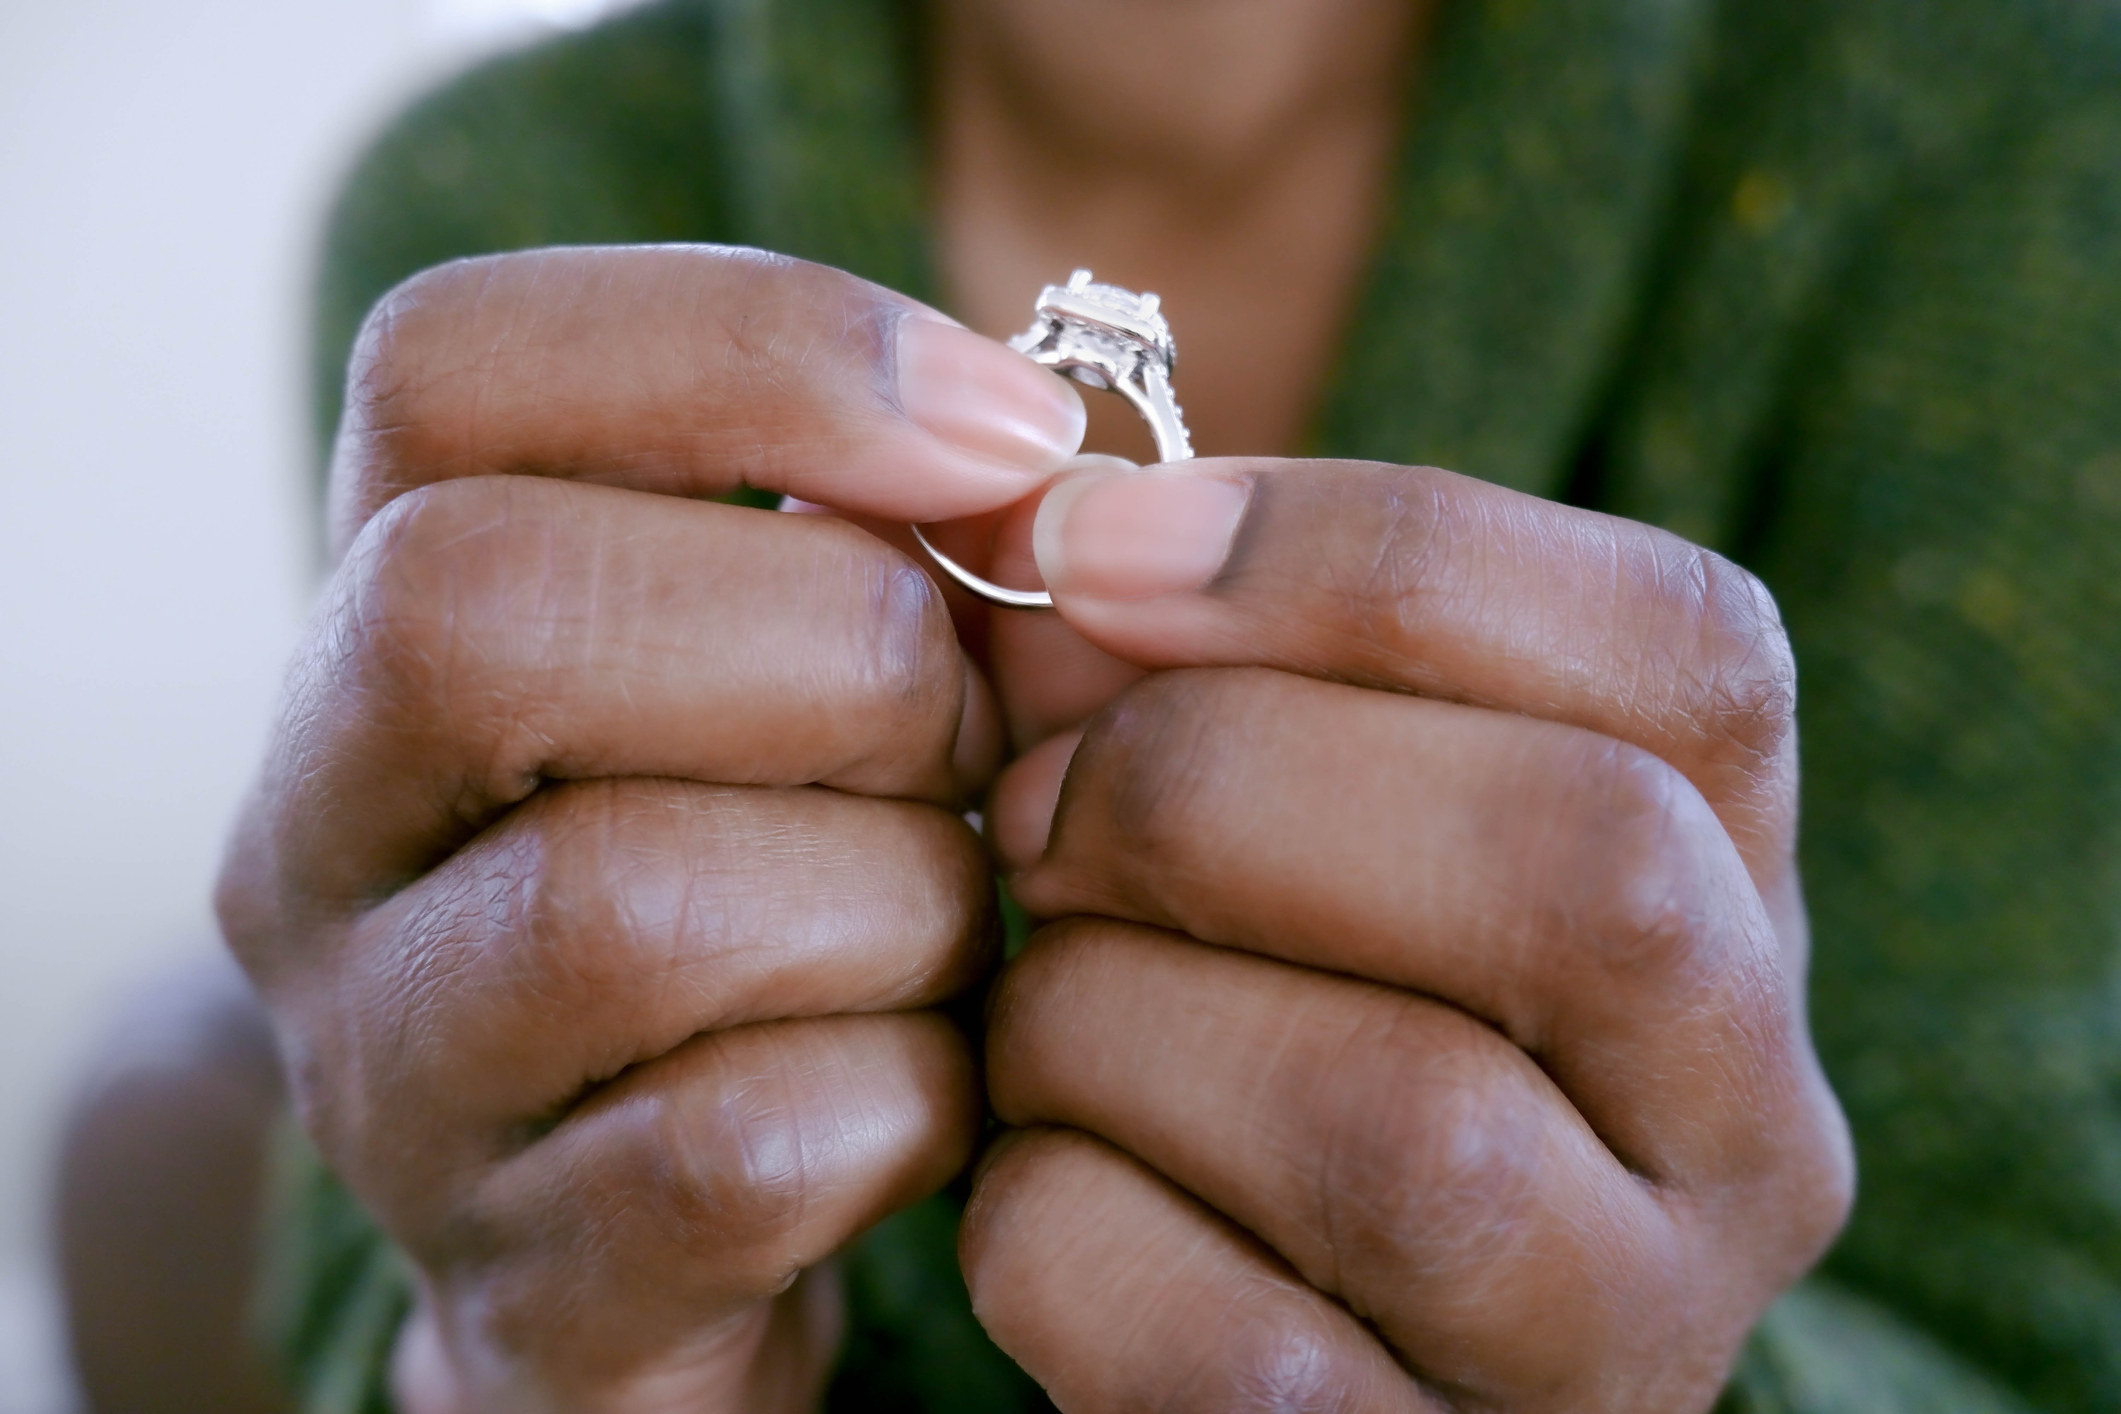 A woman holding an engagement ring.